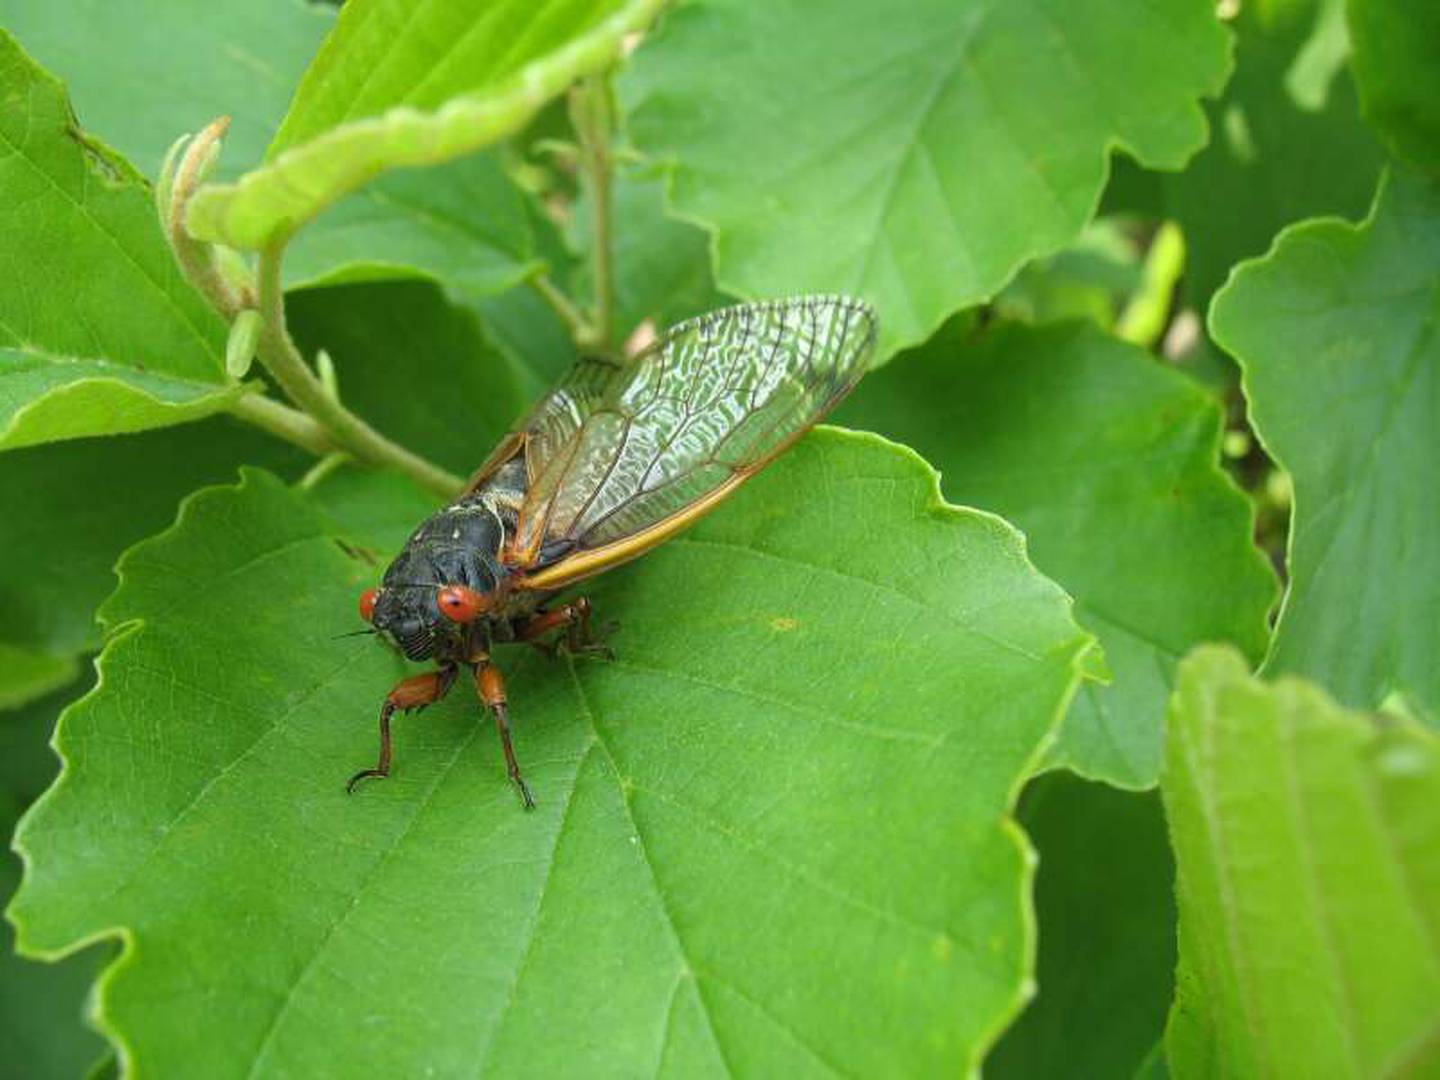 The 13- and 17-year cicadas will emerge in the same year this spring and summer for the first time since 1803. The dual emergences likely won't overlap, as the 13-year cicadas will cover most of central and southern Illinois while northern Illinois will see the 17-year brood pictured here.